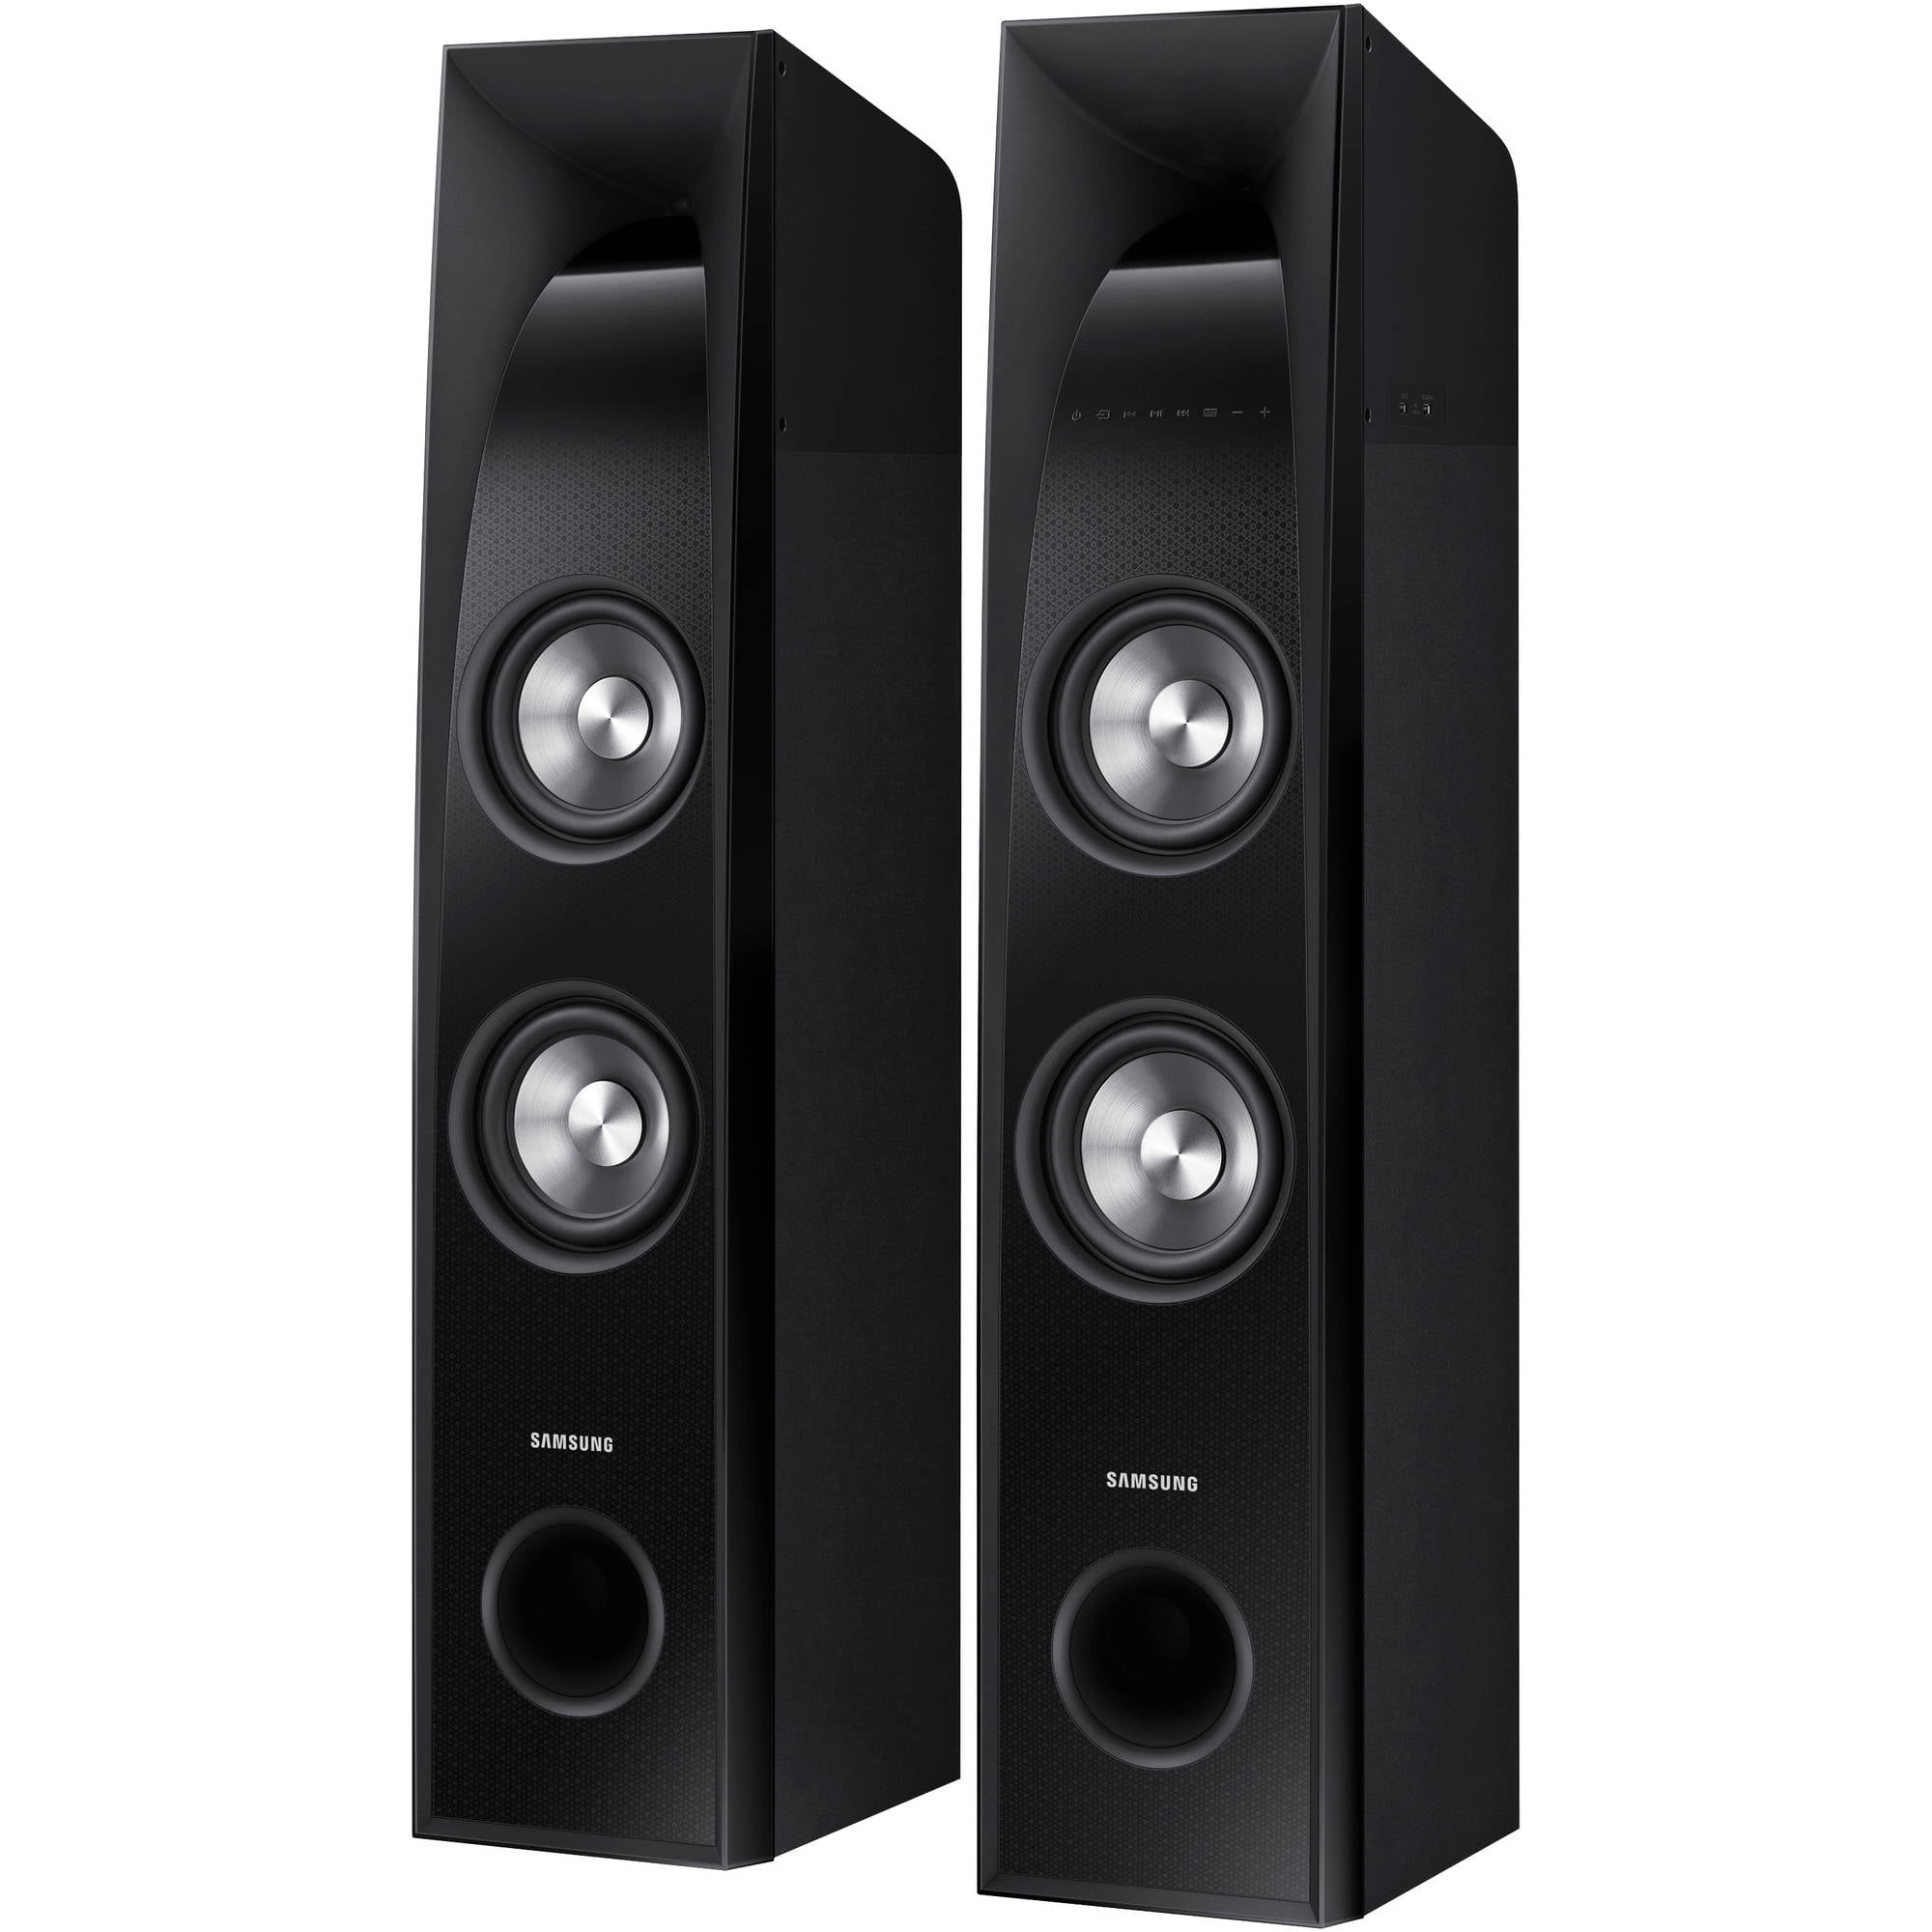 SAMSUNG 2.2 Channel 350W Sound Tower with 6" -